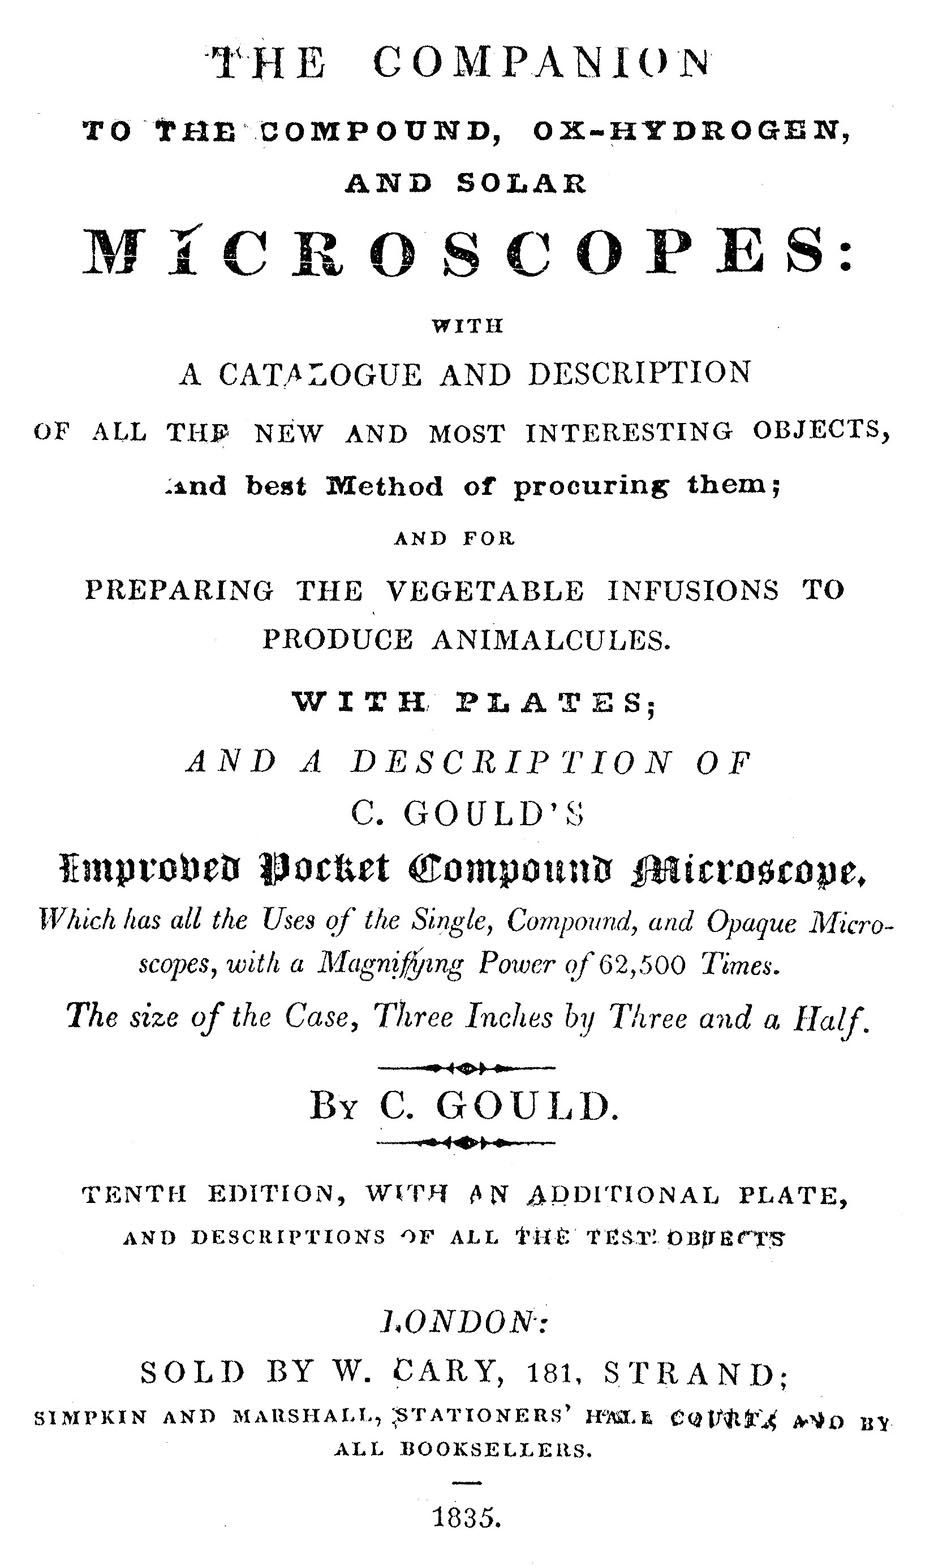 Gould Title Page from 1835